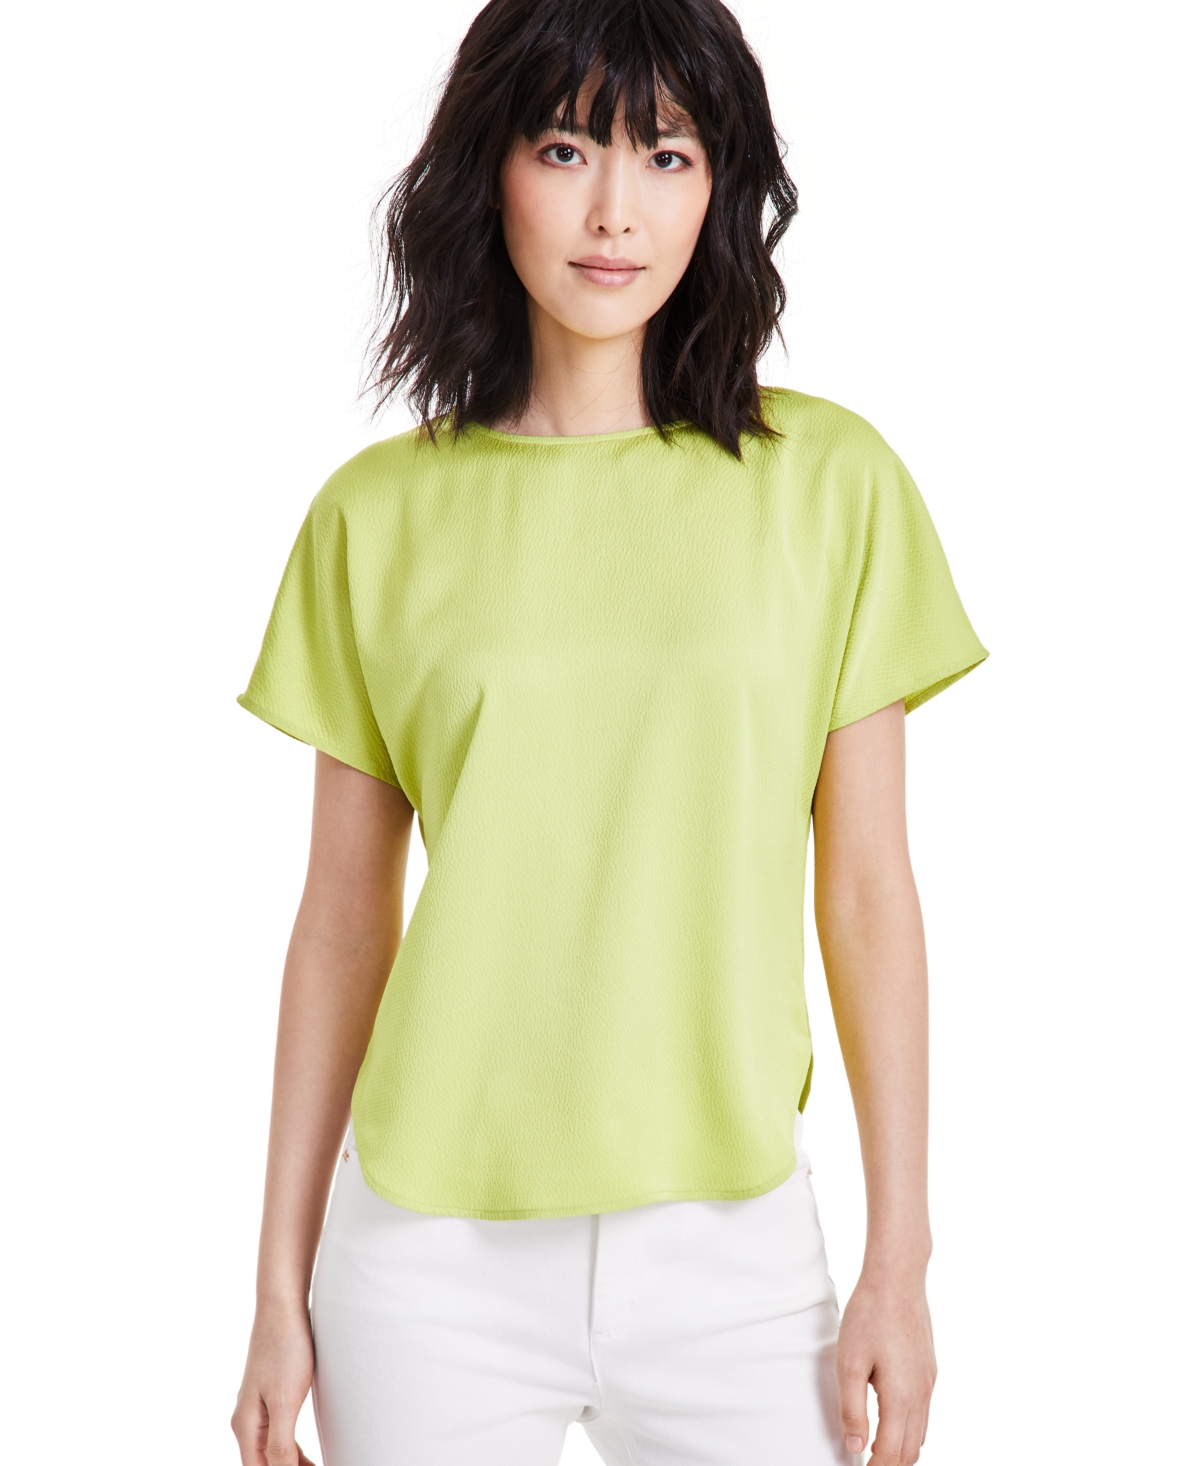 Women's Satin Boat-Neck Top - Sprout